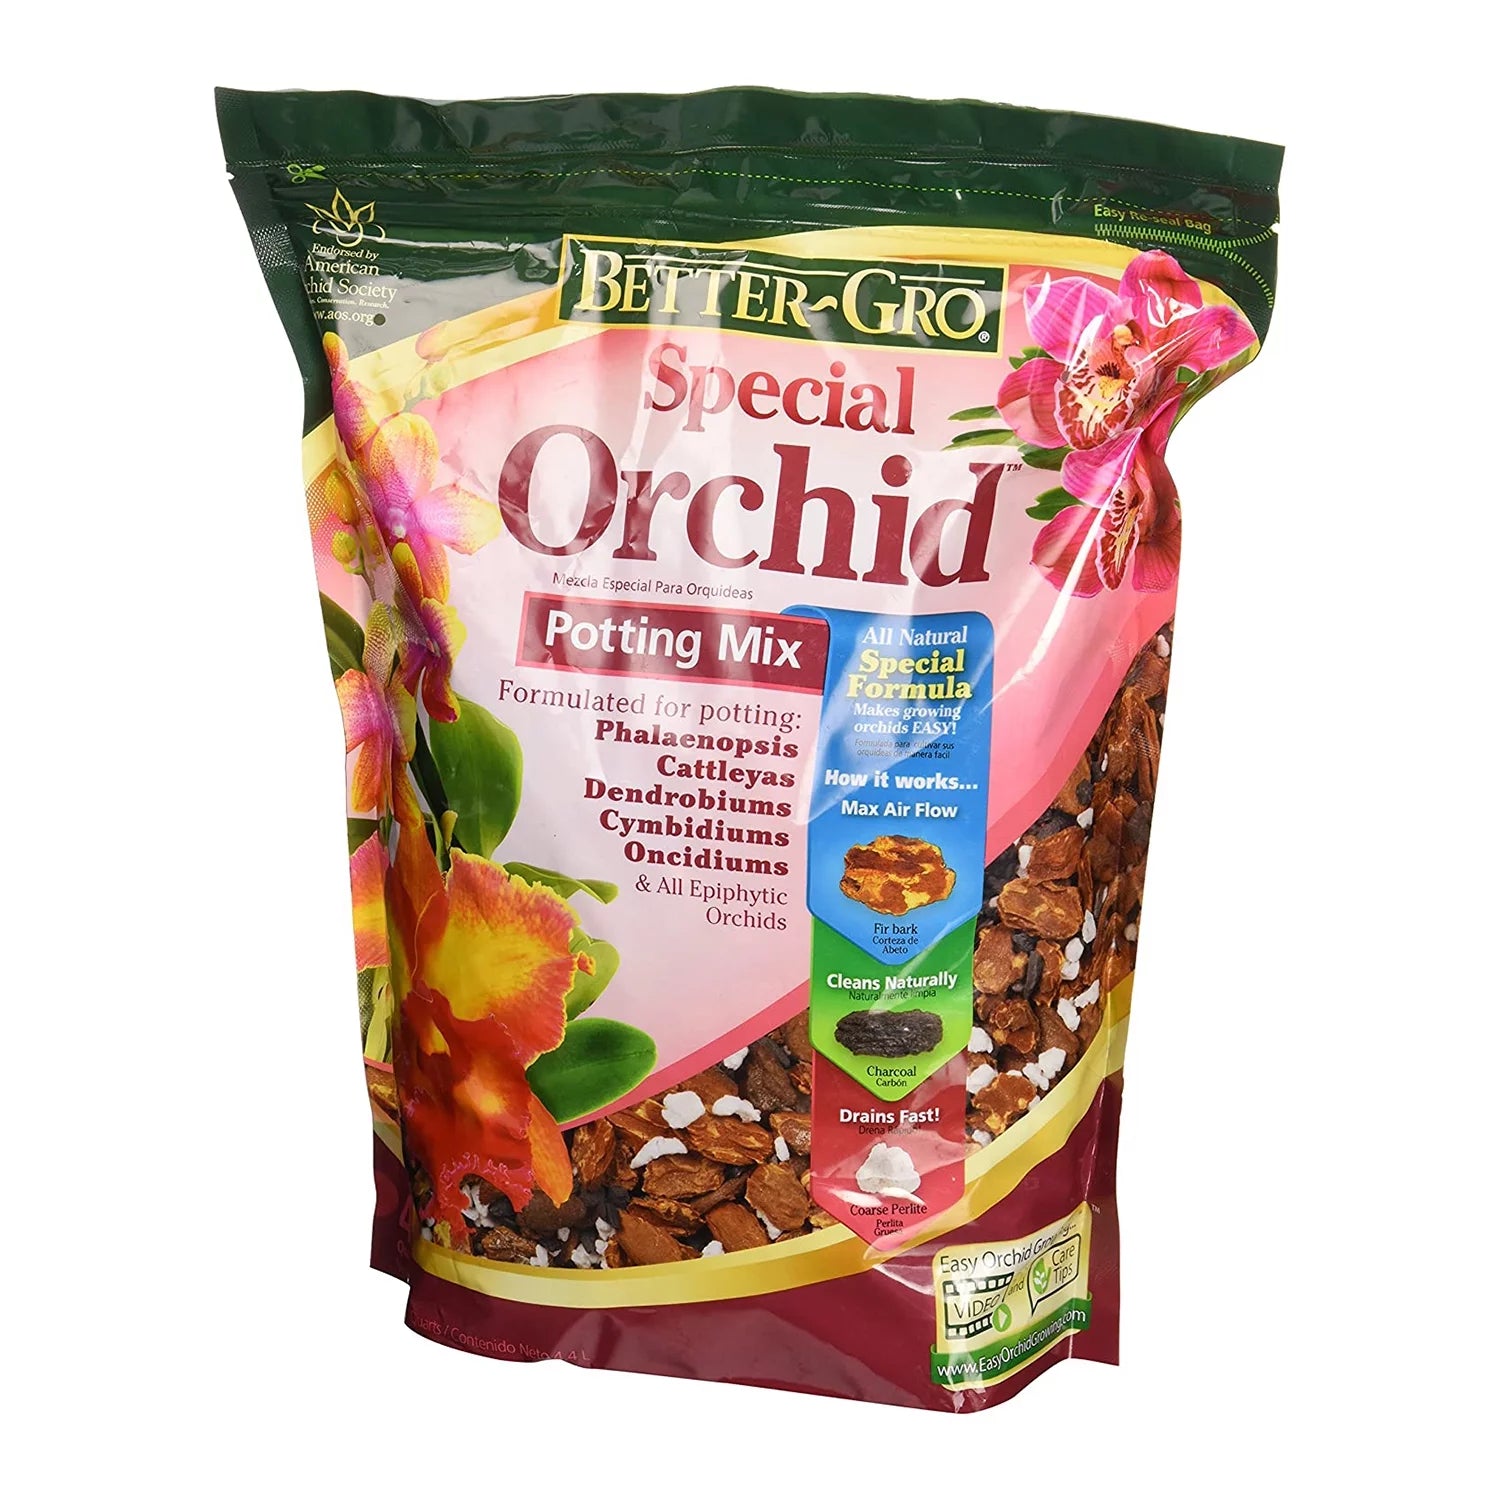 A great Orchid Potting Mix that combines Charcoal, Perlite and Soil together. 8 Qt Bag.